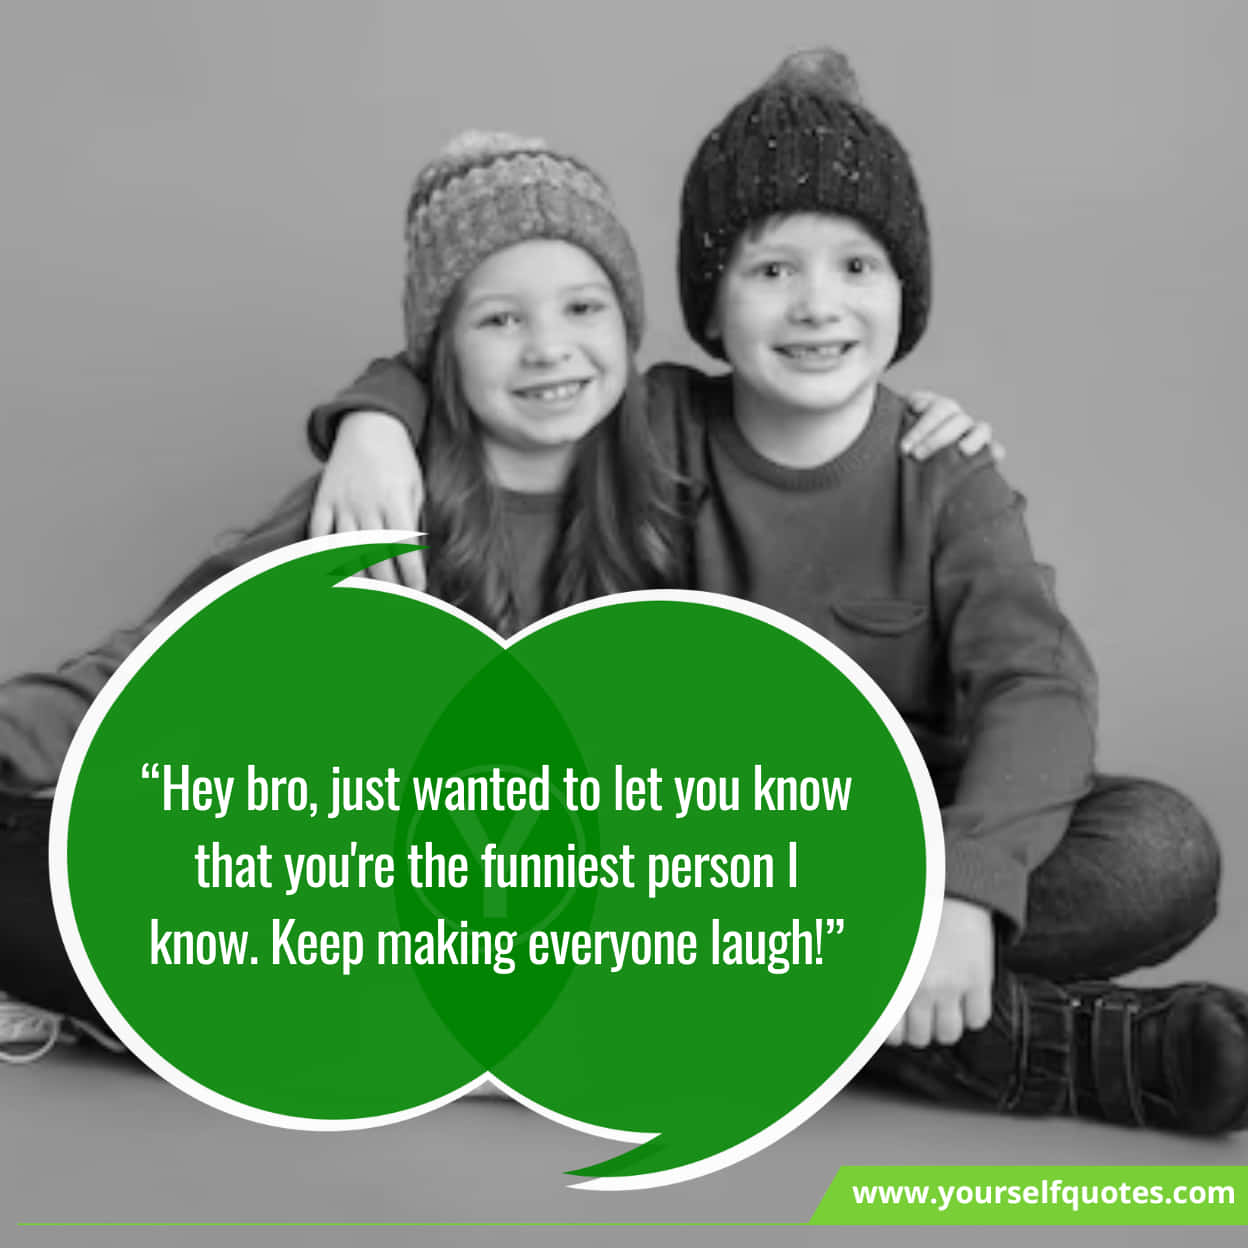 Cute & Hilarious Messages for Siblings